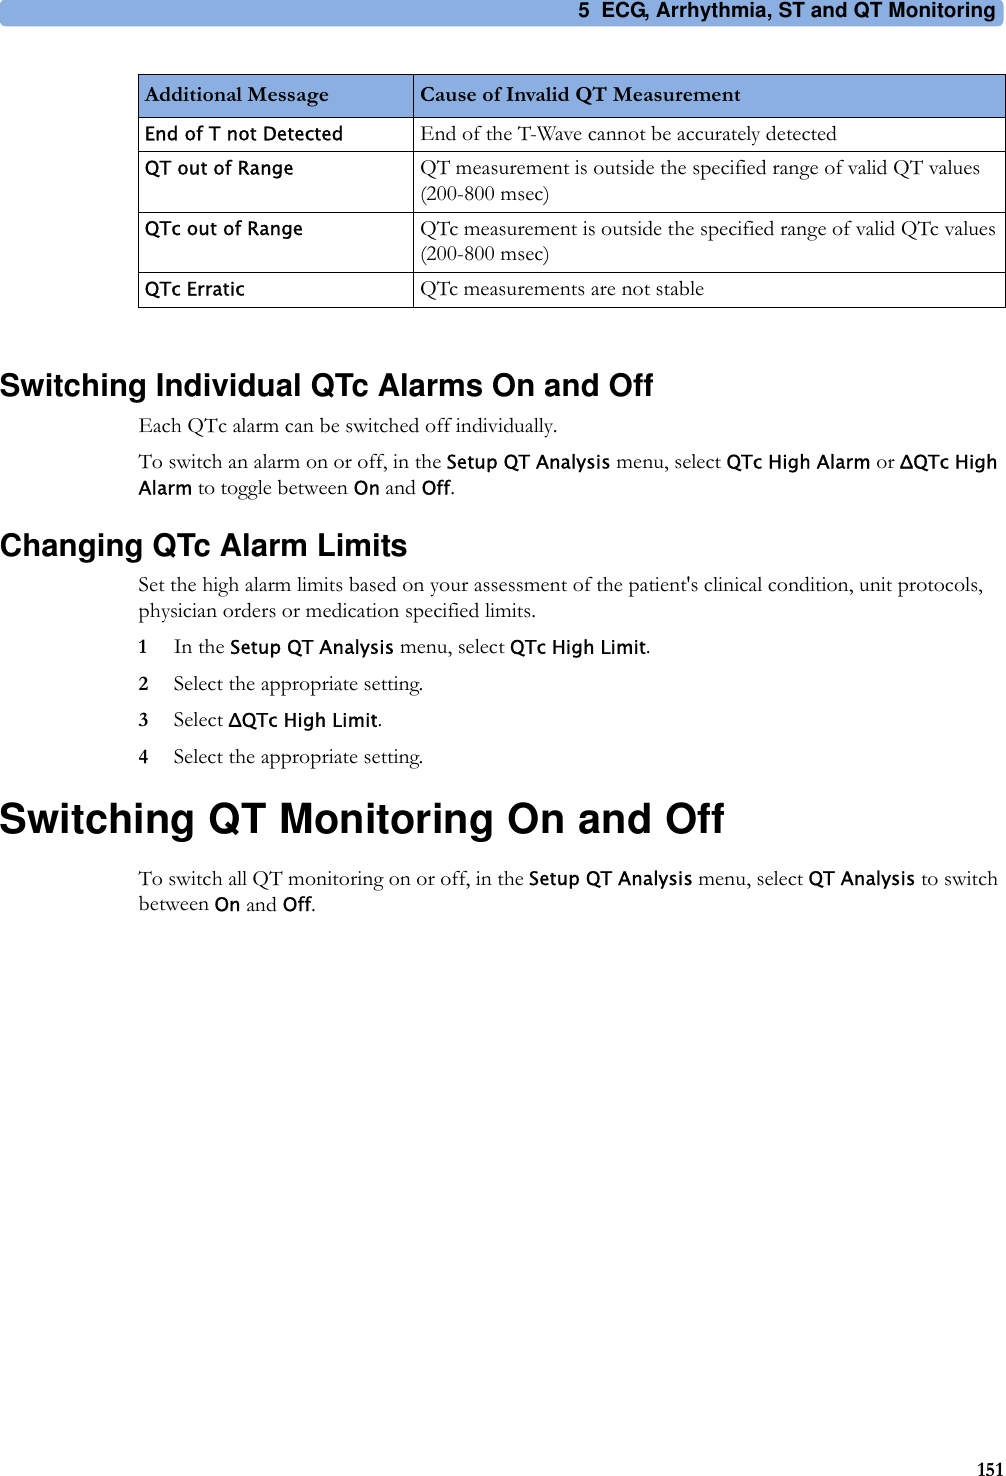 5 ECG, Arrhythmia, ST and QT Monitoring151Switching Individual QTc Alarms On and OffEach QTc alarm can be switched off individually.To switch an alarm on or off, in the Setup QT Analysis menu, select QTc High Alarm or ΔQTc High Alarm to toggle between On and Off.Changing QTc Alarm LimitsSet the high alarm limits based on your assessment of the patient&apos;s clinical condition, unit protocols, physician orders or medication specified limits.1In the Setup QT Analysis menu, select QTc High Limit.2Select the appropriate setting.3Select ΔQTc High Limit.4Select the appropriate setting.Switching QT Monitoring On and OffTo switch all QT monitoring on or off, in the Setup QT Analysis menu, select QT Analysis to switch between On and Off.End of T not Detected End of the T-Wave cannot be accurately detectedQT out of Range QT measurement is outside the specified range of valid QT values (200-800 msec)QTc out of Range QTc measurement is outside the specified range of valid QTc values (200-800 msec)QTc Erratic QTc measurements are not stableAdditional Message Cause of Invalid QT Measurement